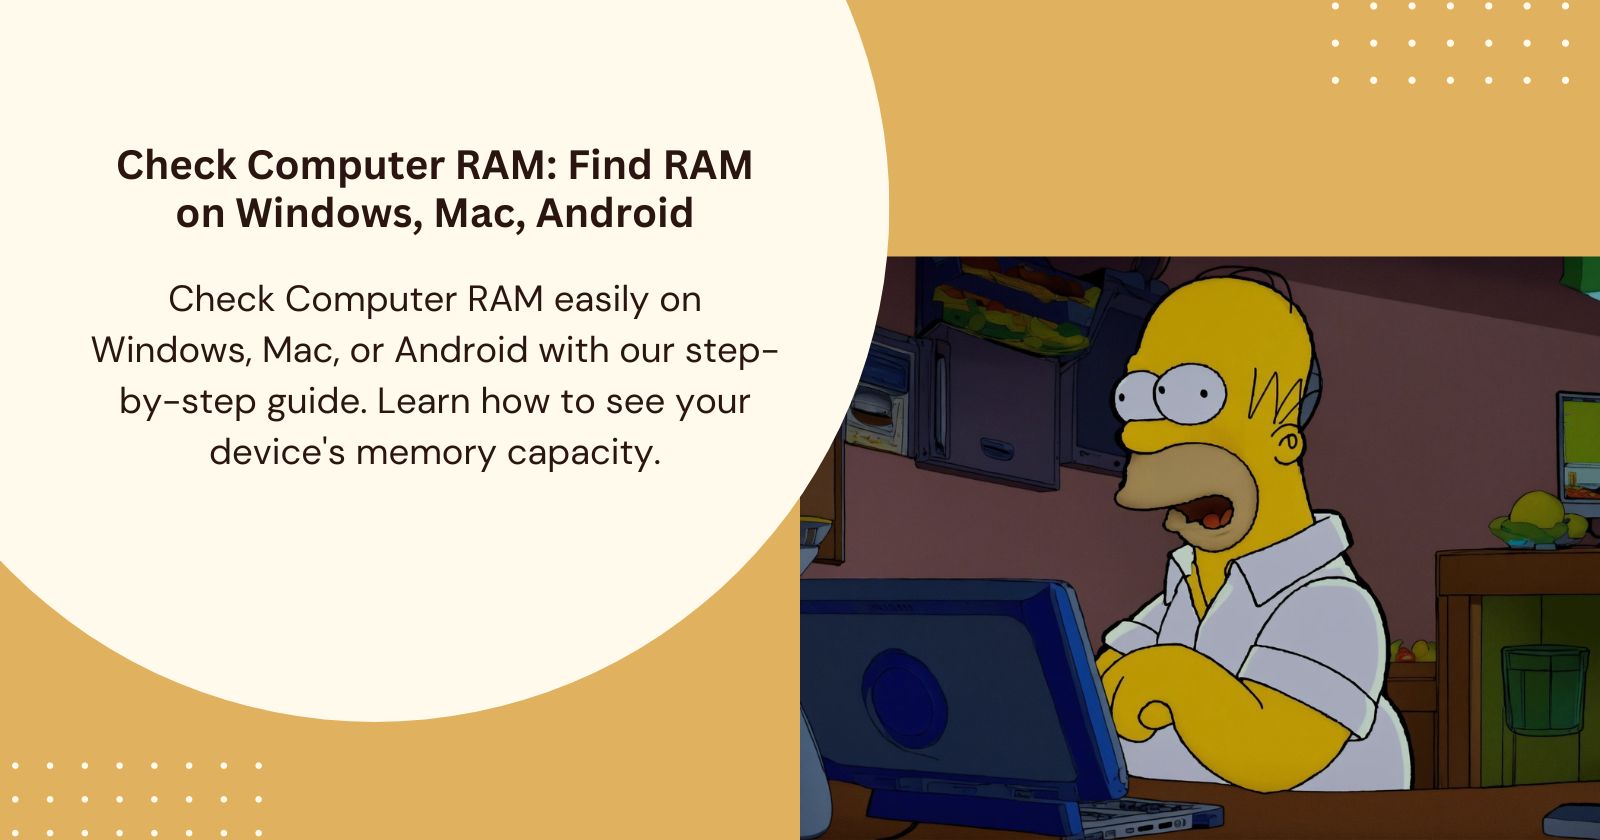 How Much RAM easily on Windows, Mac, or Android with our step-by-step guide. Learn how to see your device's memory capacity.